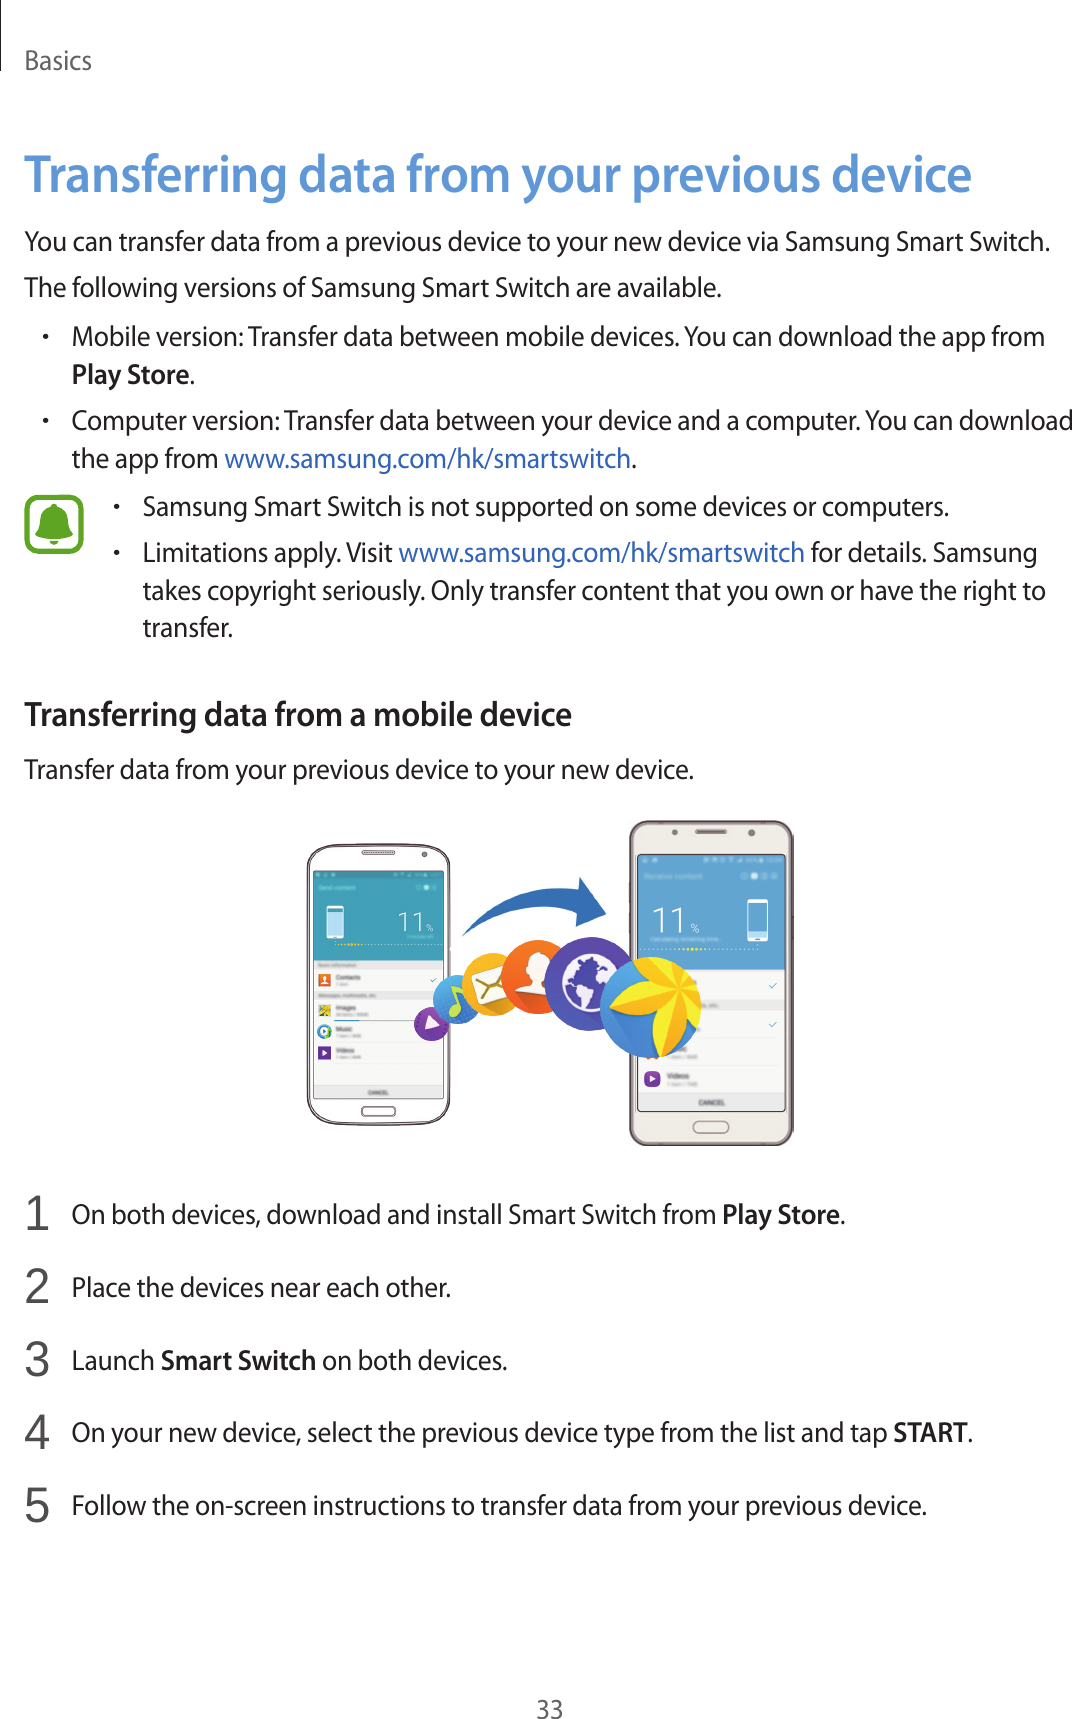 Basics33Transferring data from your previous deviceYou can transfer data from a previous device to your new device via Samsung Smart Switch.The following versions of Samsung Smart Switch are available.•Mobile version: Transfer data between mobile devices. You can download the app from Play Store.•Computer version: Transfer data between your device and a computer. You can download the app from www.samsung.com/hk/smartswitch.•Samsung Smart Switch is not supported on some devices or computers.•Limitations apply. Visit www.samsung.com/hk/smartswitch for details. Samsung takes copyright seriously. Only transfer content that you own or have the right to transfer.Transferring data from a mobile deviceTransfer data from your previous device to your new device.1  On both devices, download and install Smart Switch from Play Store.2  Place the devices near each other.3  Launch Smart Switch on both devices.4  On your new device, select the previous device type from the list and tap START.5  Follow the on-screen instructions to transfer data from your previous device.